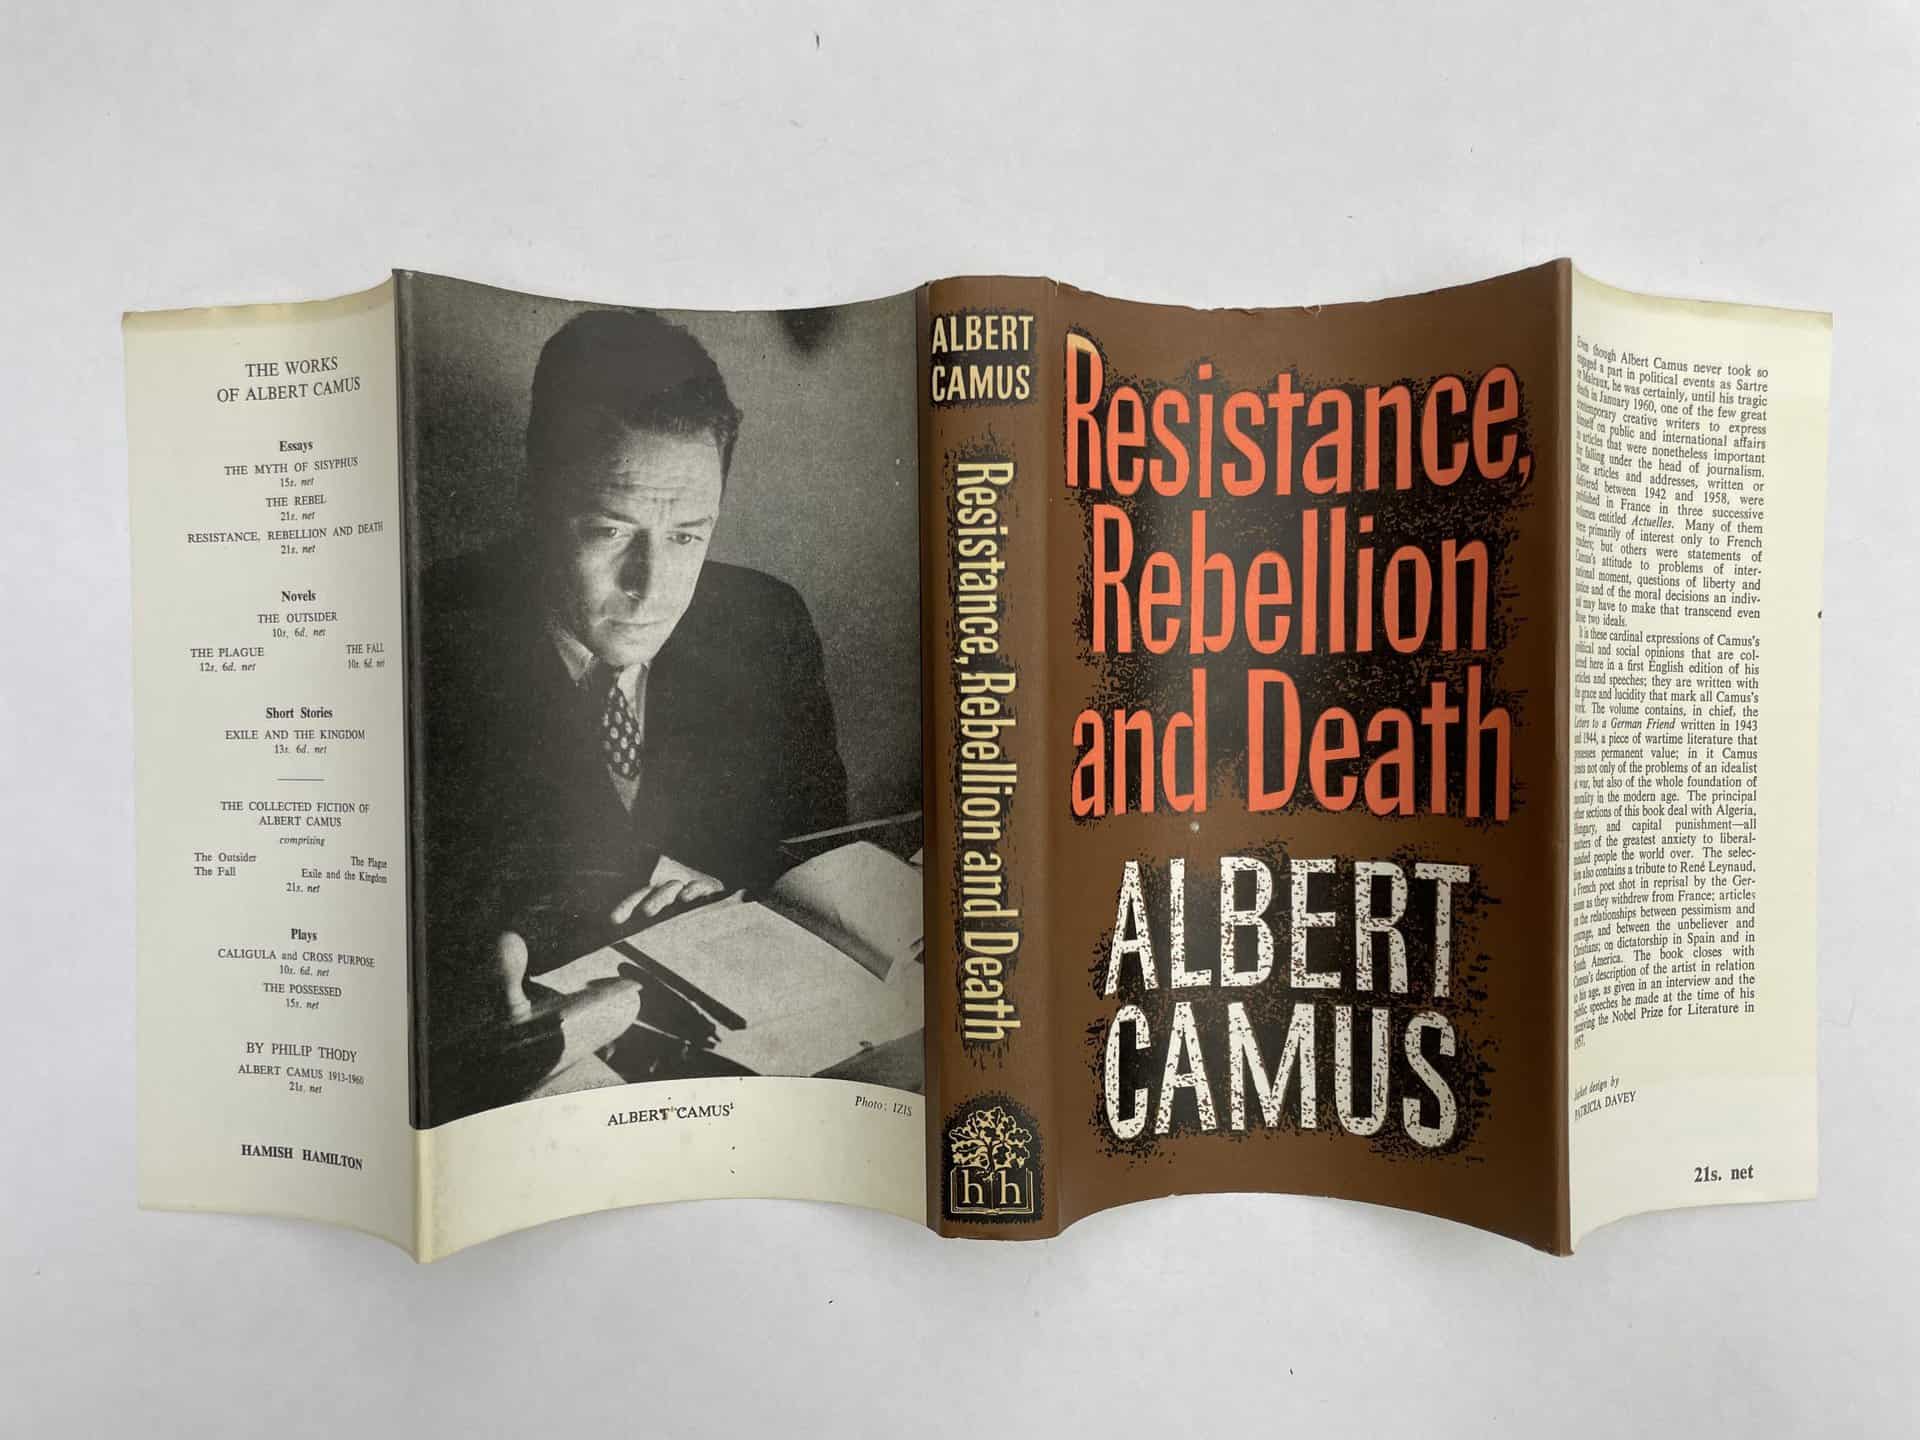 albert camus ressistance rebellion and death first ed4